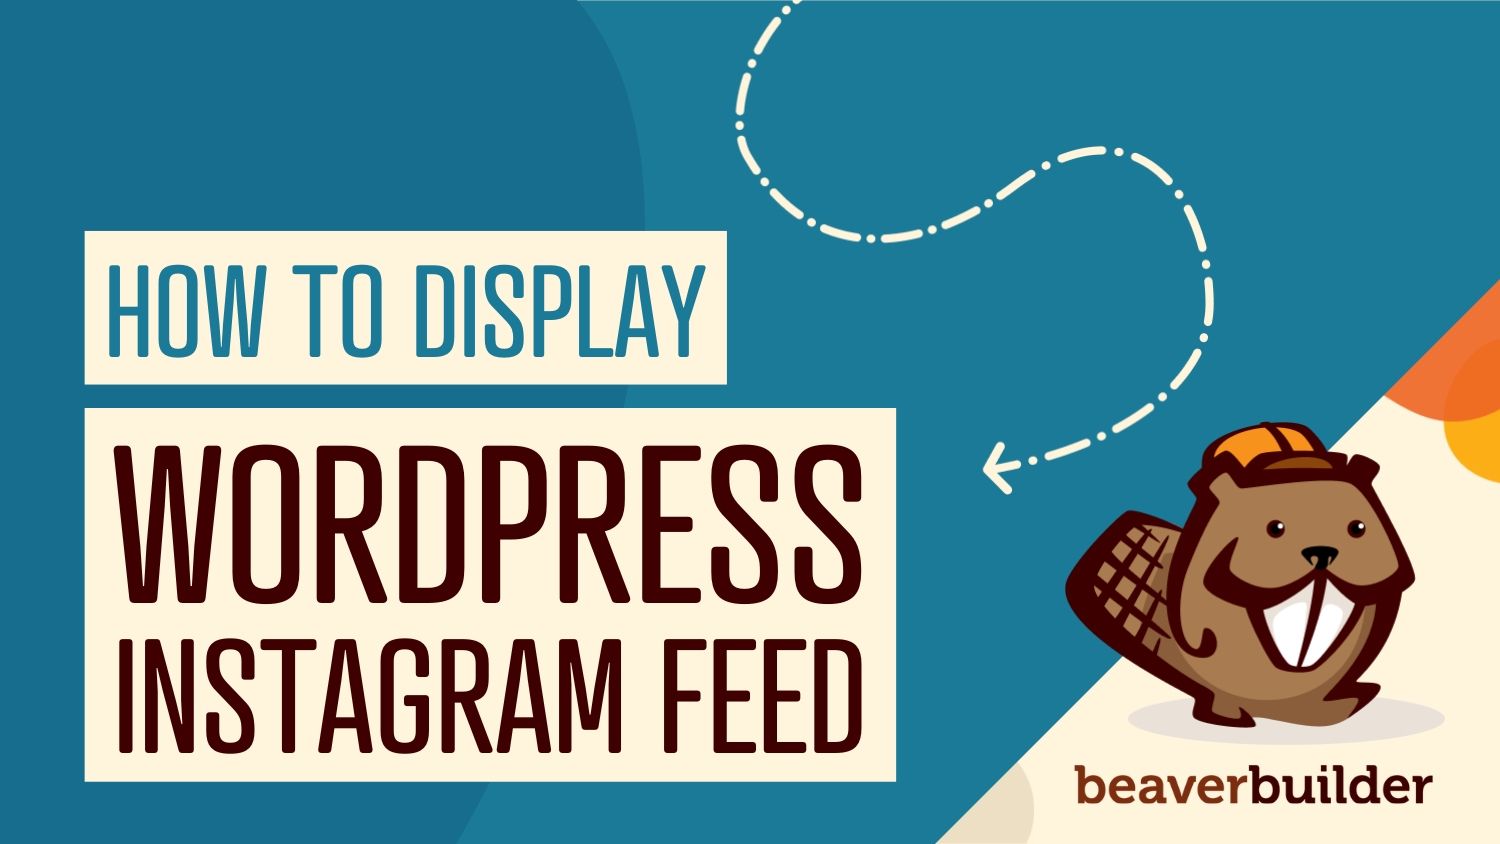 How to Display an Instagram Feed in WordPress